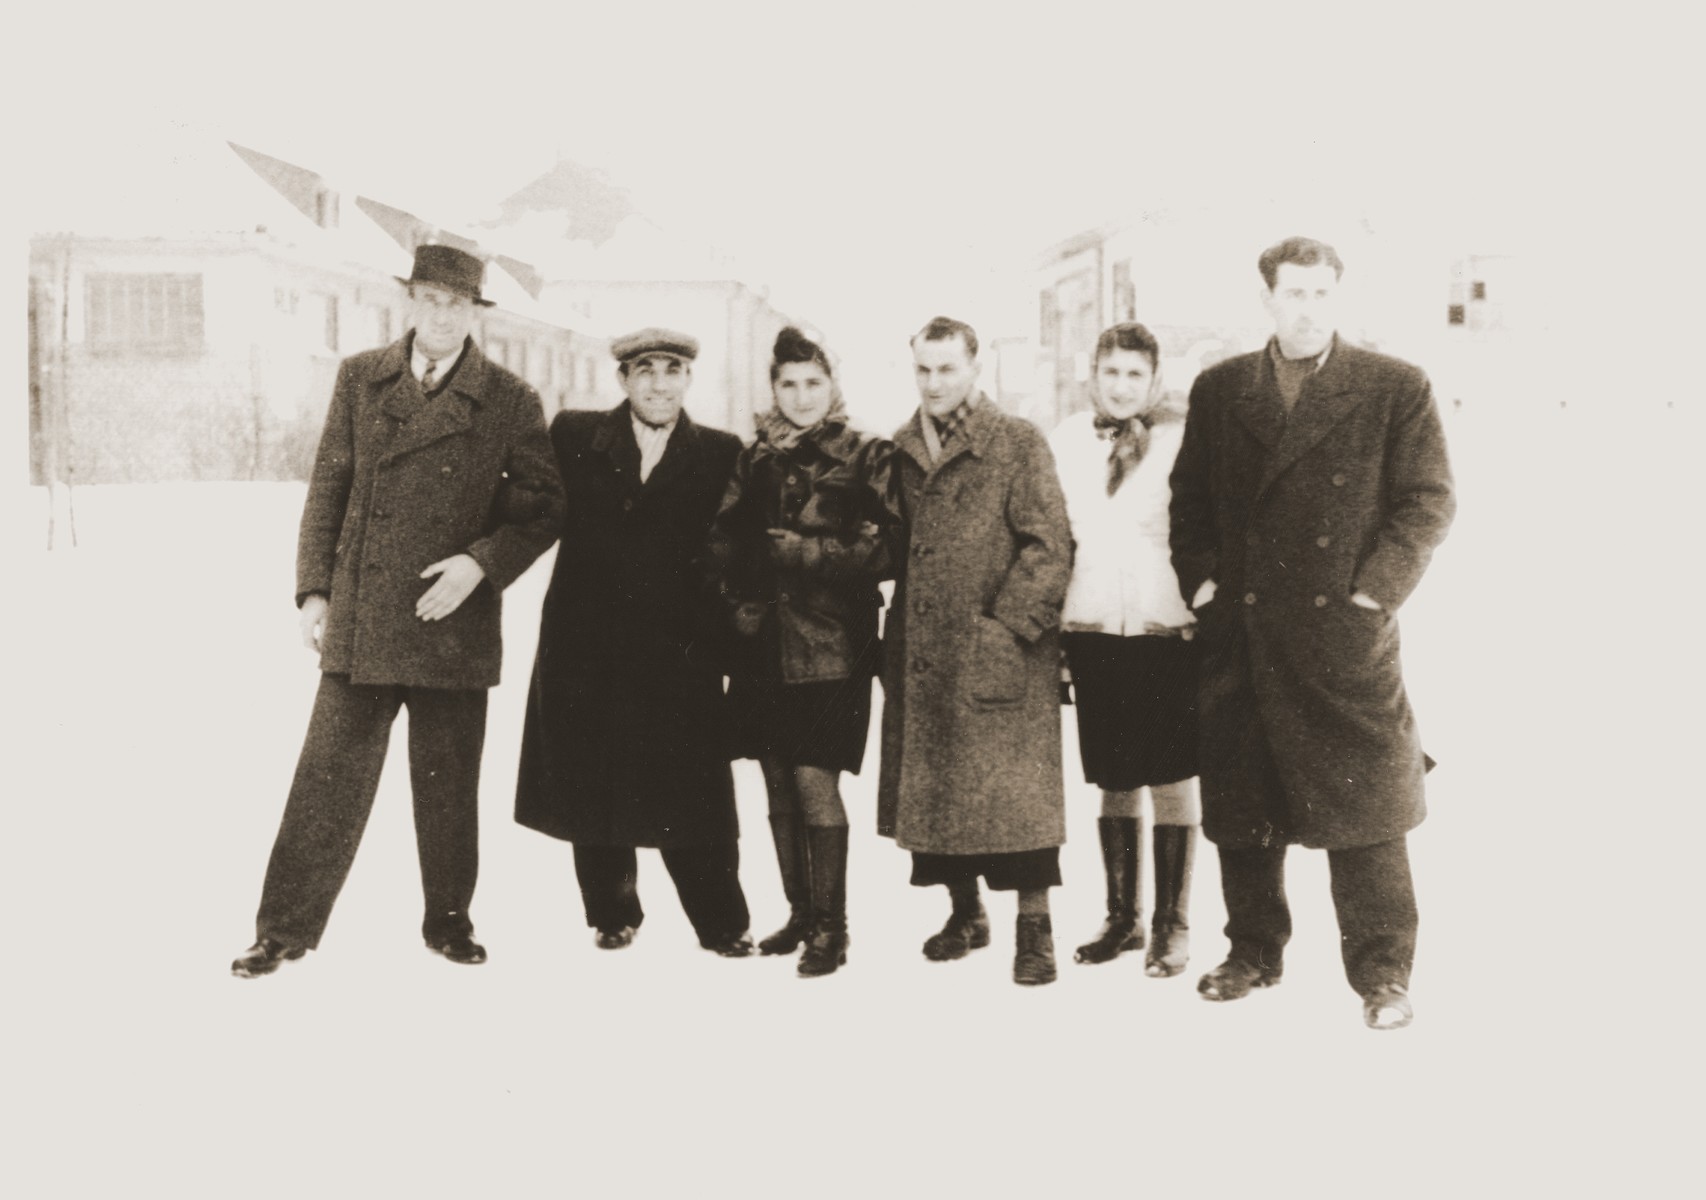 Group portrait of Jewish DPs standing in the snow in the Bergen-Belsen displaced persons camp.

Among those pictured are: Moishe Broda, David Marmor, Edek Goldblum and Manya (Goldblum) Marmor.